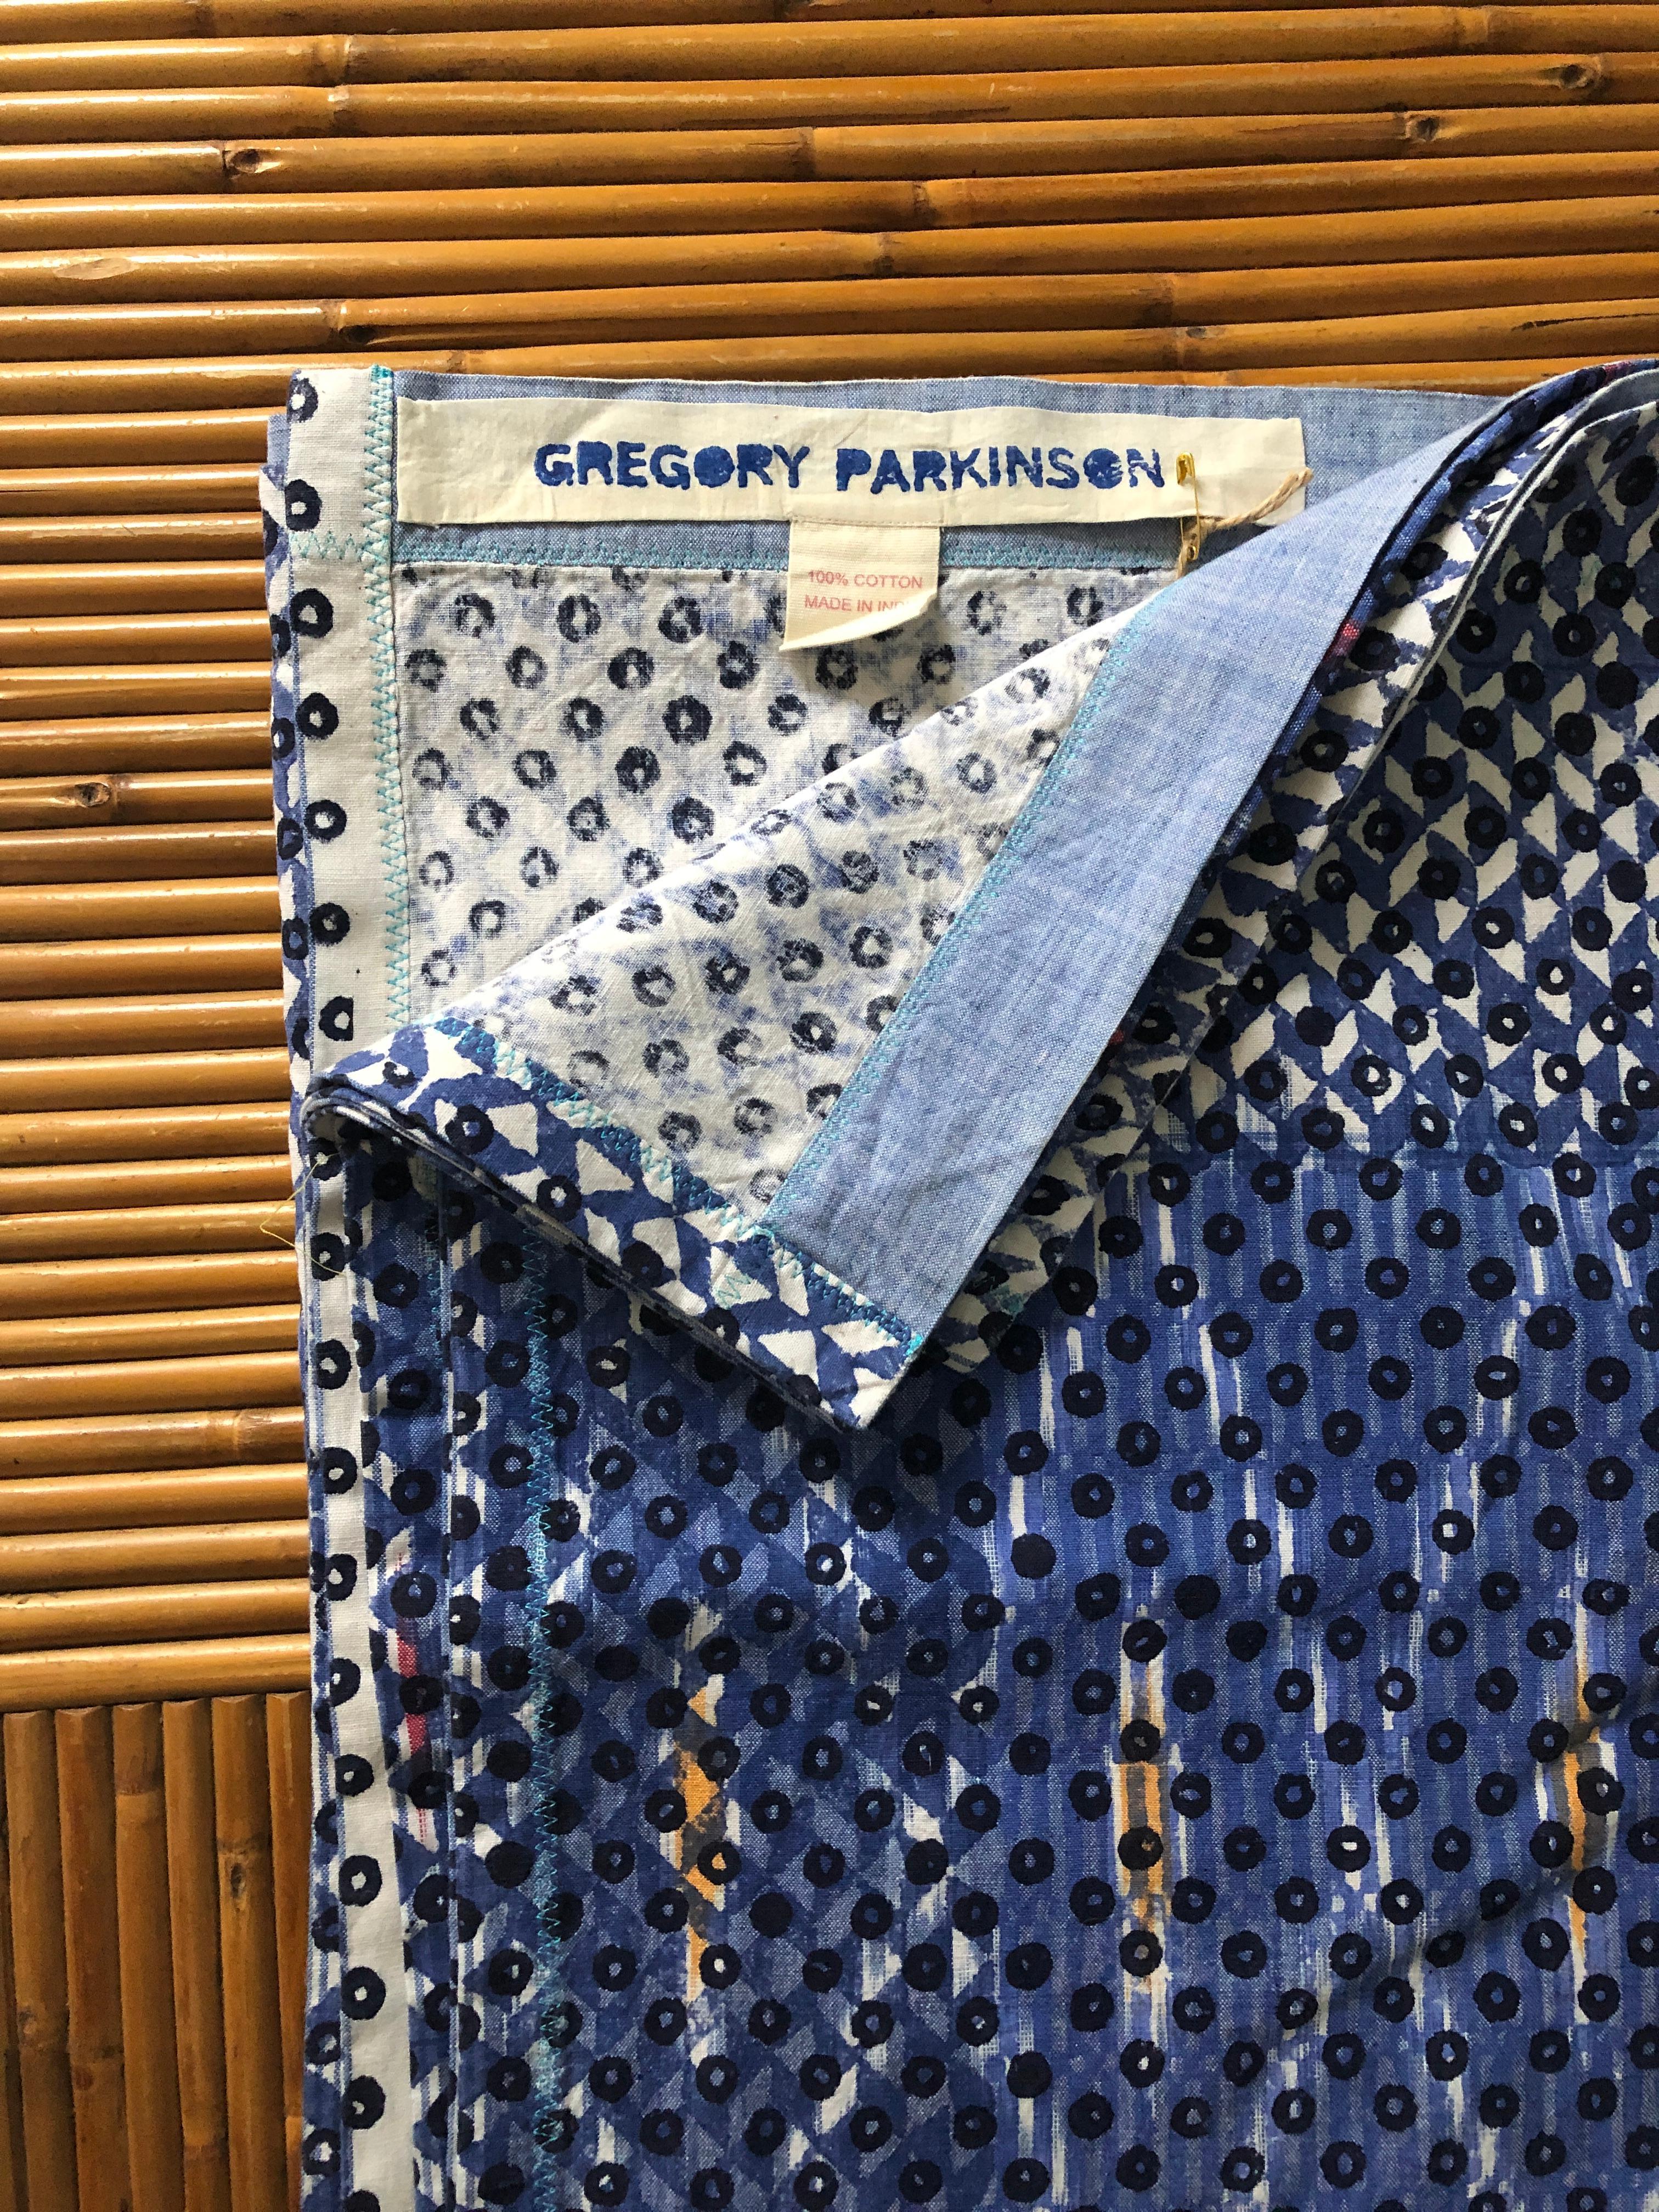 American Contemporary Gregory Parkinson Tablecloth with Blue Ikat Hand-Blocked Patterns